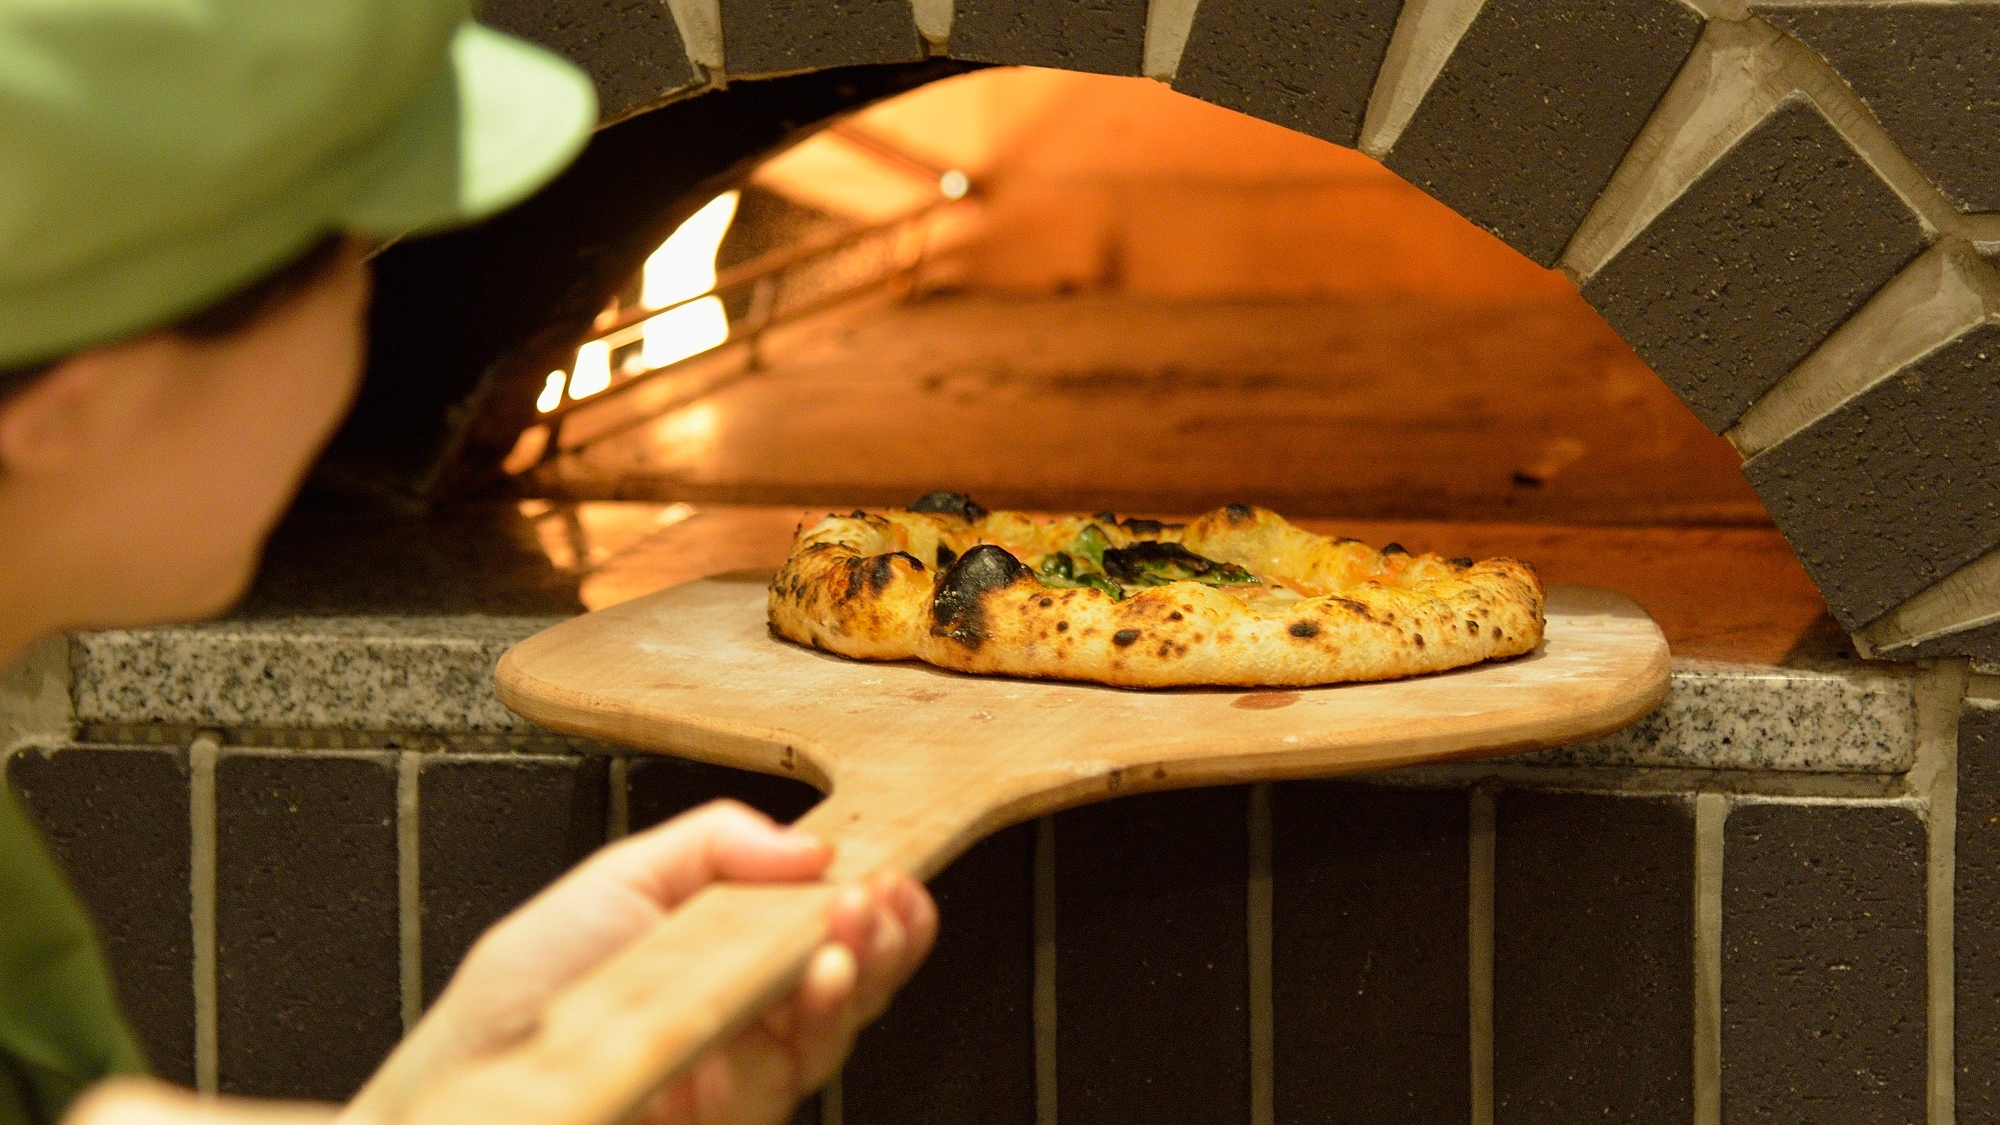 [Restaurant] Pizza baked in a full-scale stone oven.